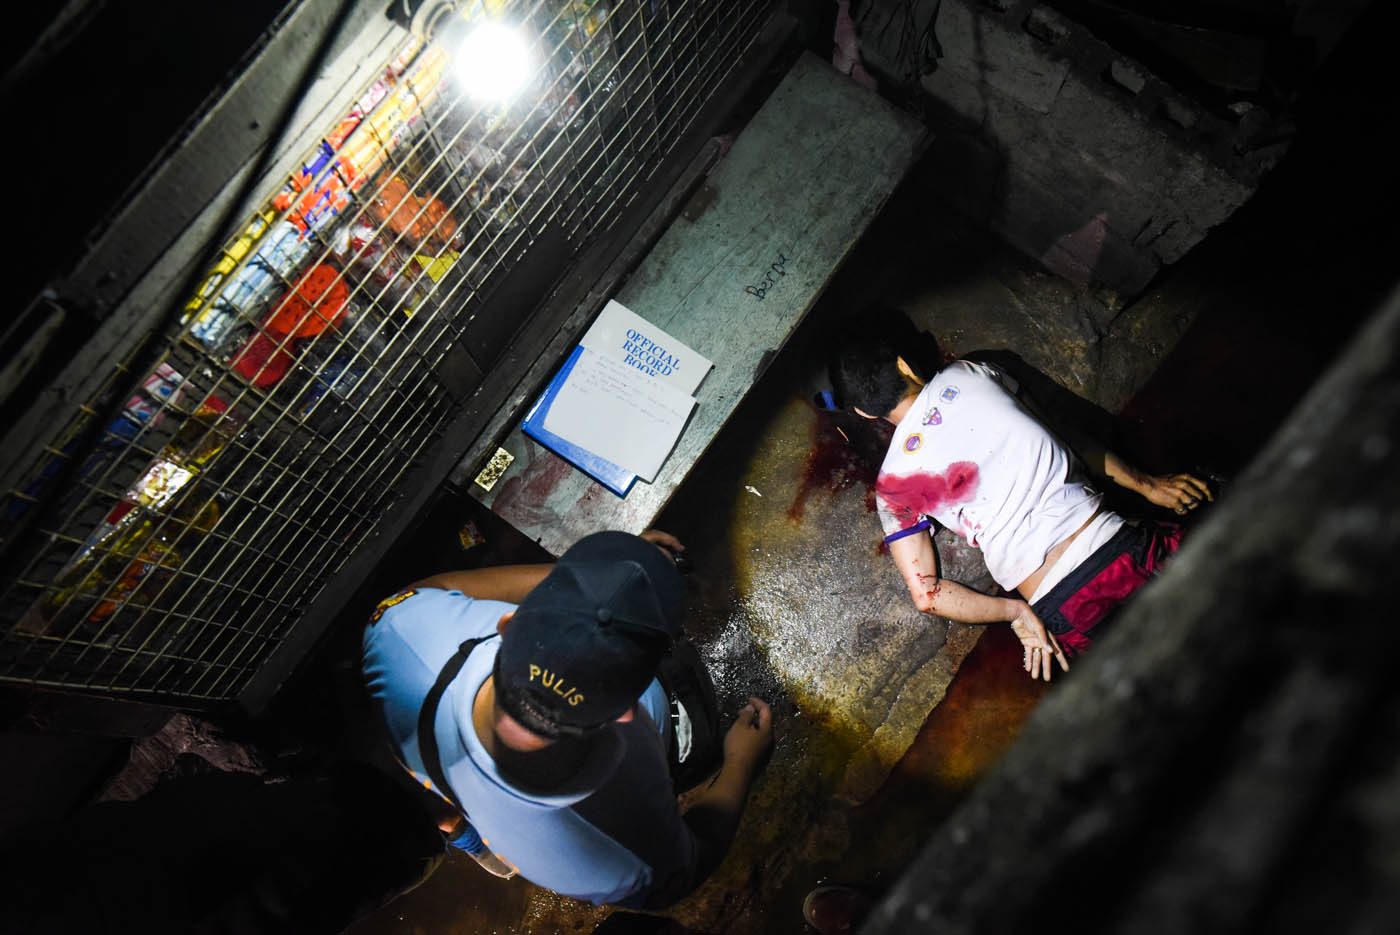 Climate of fear: Justice remains elusive 2 years into Duterte’s drug war